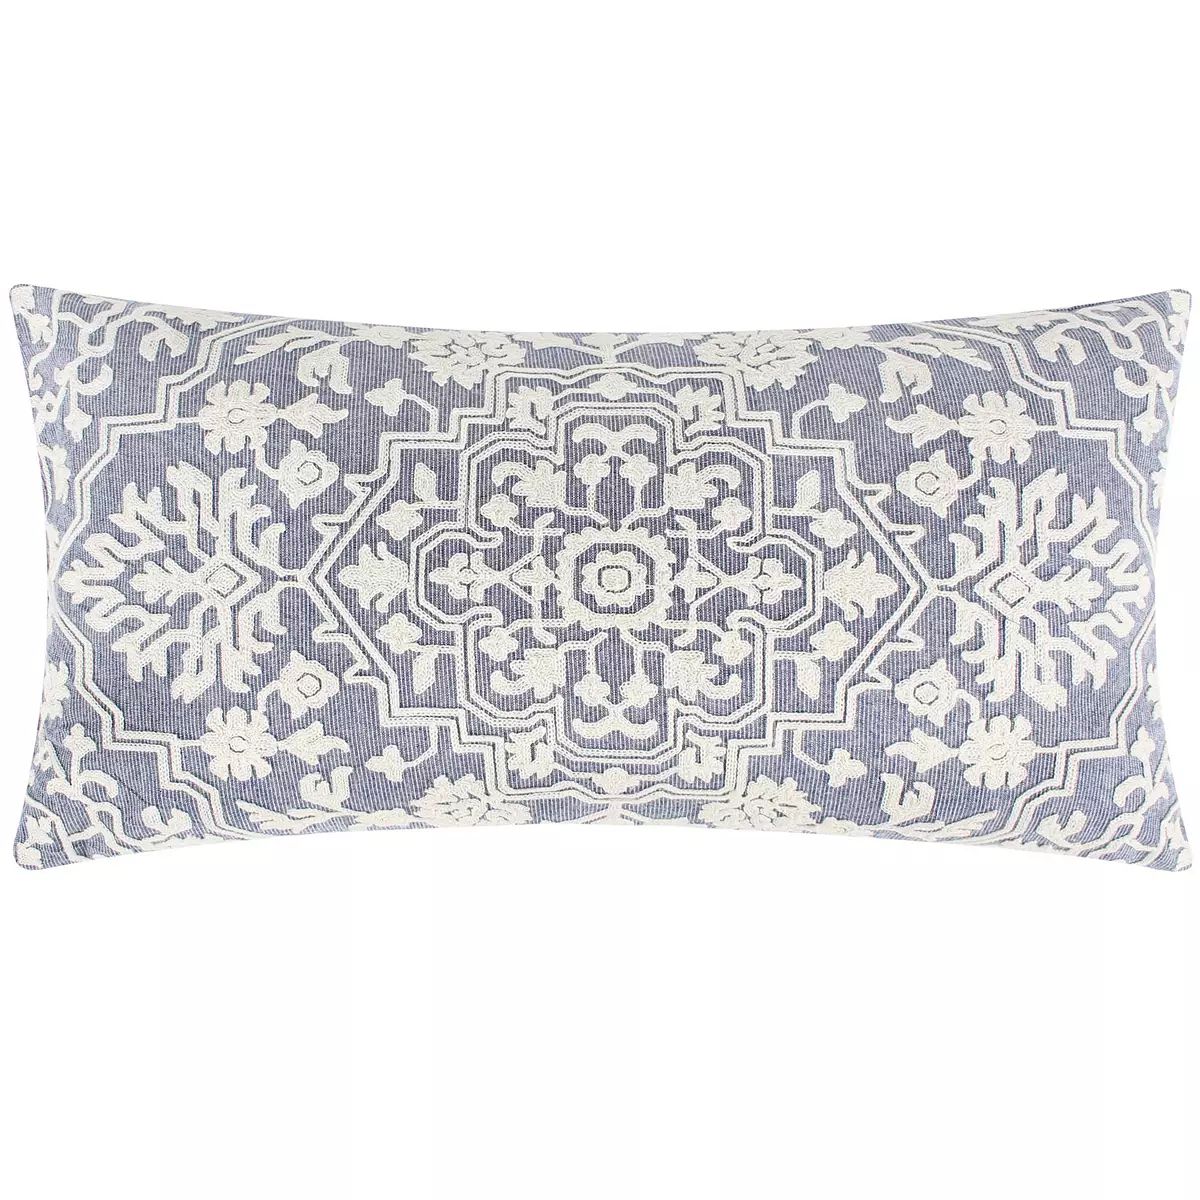 Levtex Home Emel Grey Embroidered Throw Pillow | Kohl's